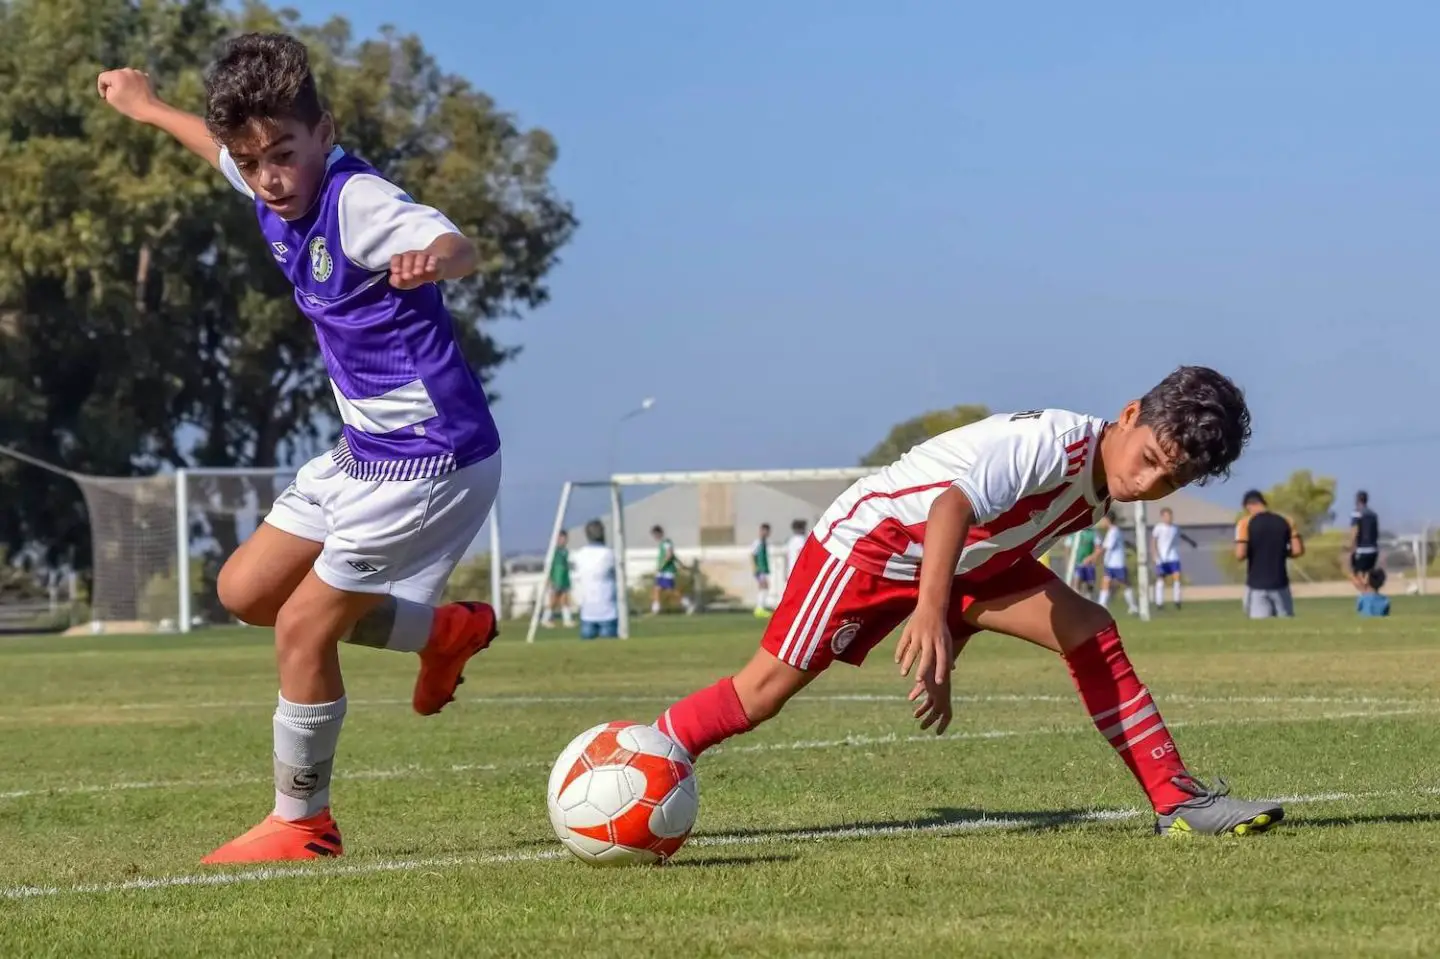 Two boys playing football. One is in a purple and white strip. The other is in a red and white strip. They are tackling each other to get the soccer ball